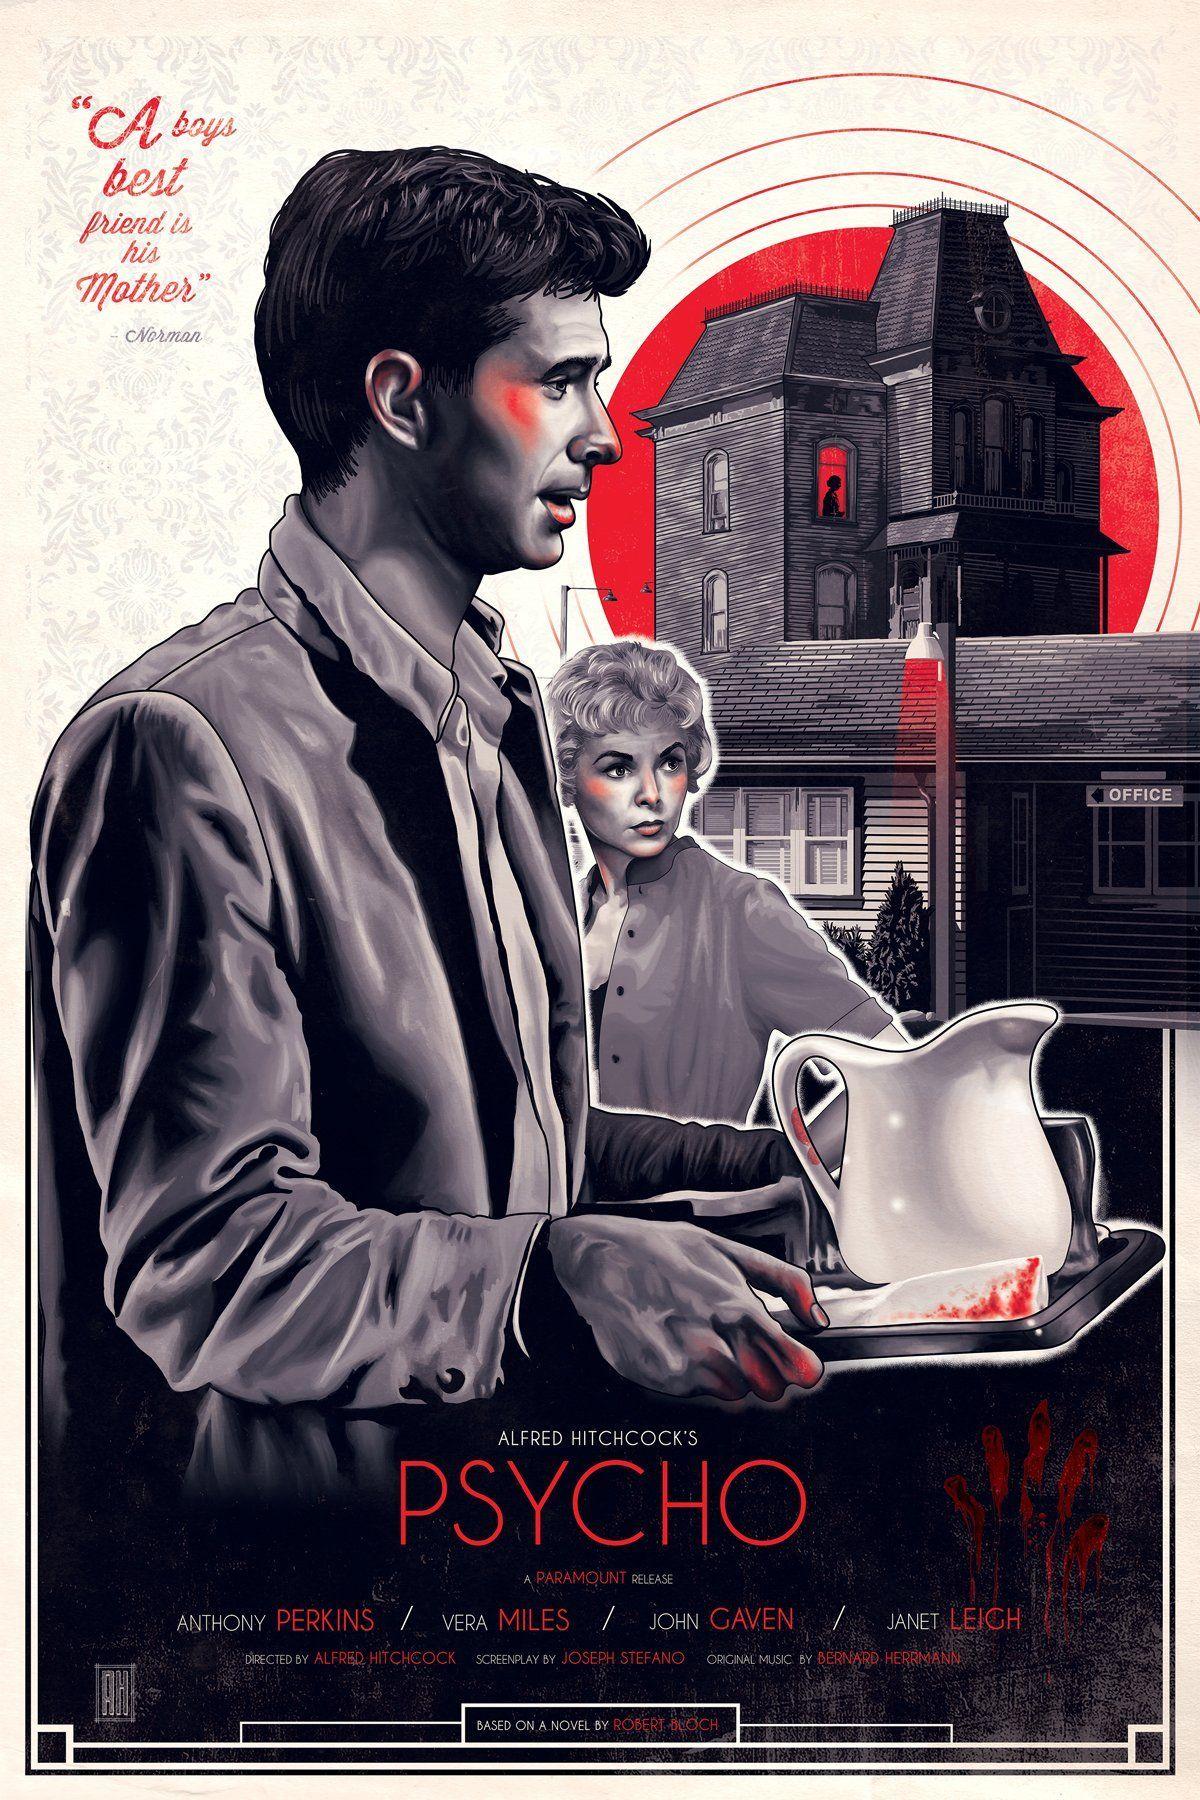 Psycho (1960) HD Wallpaper From Gallsource.com. Movie posters